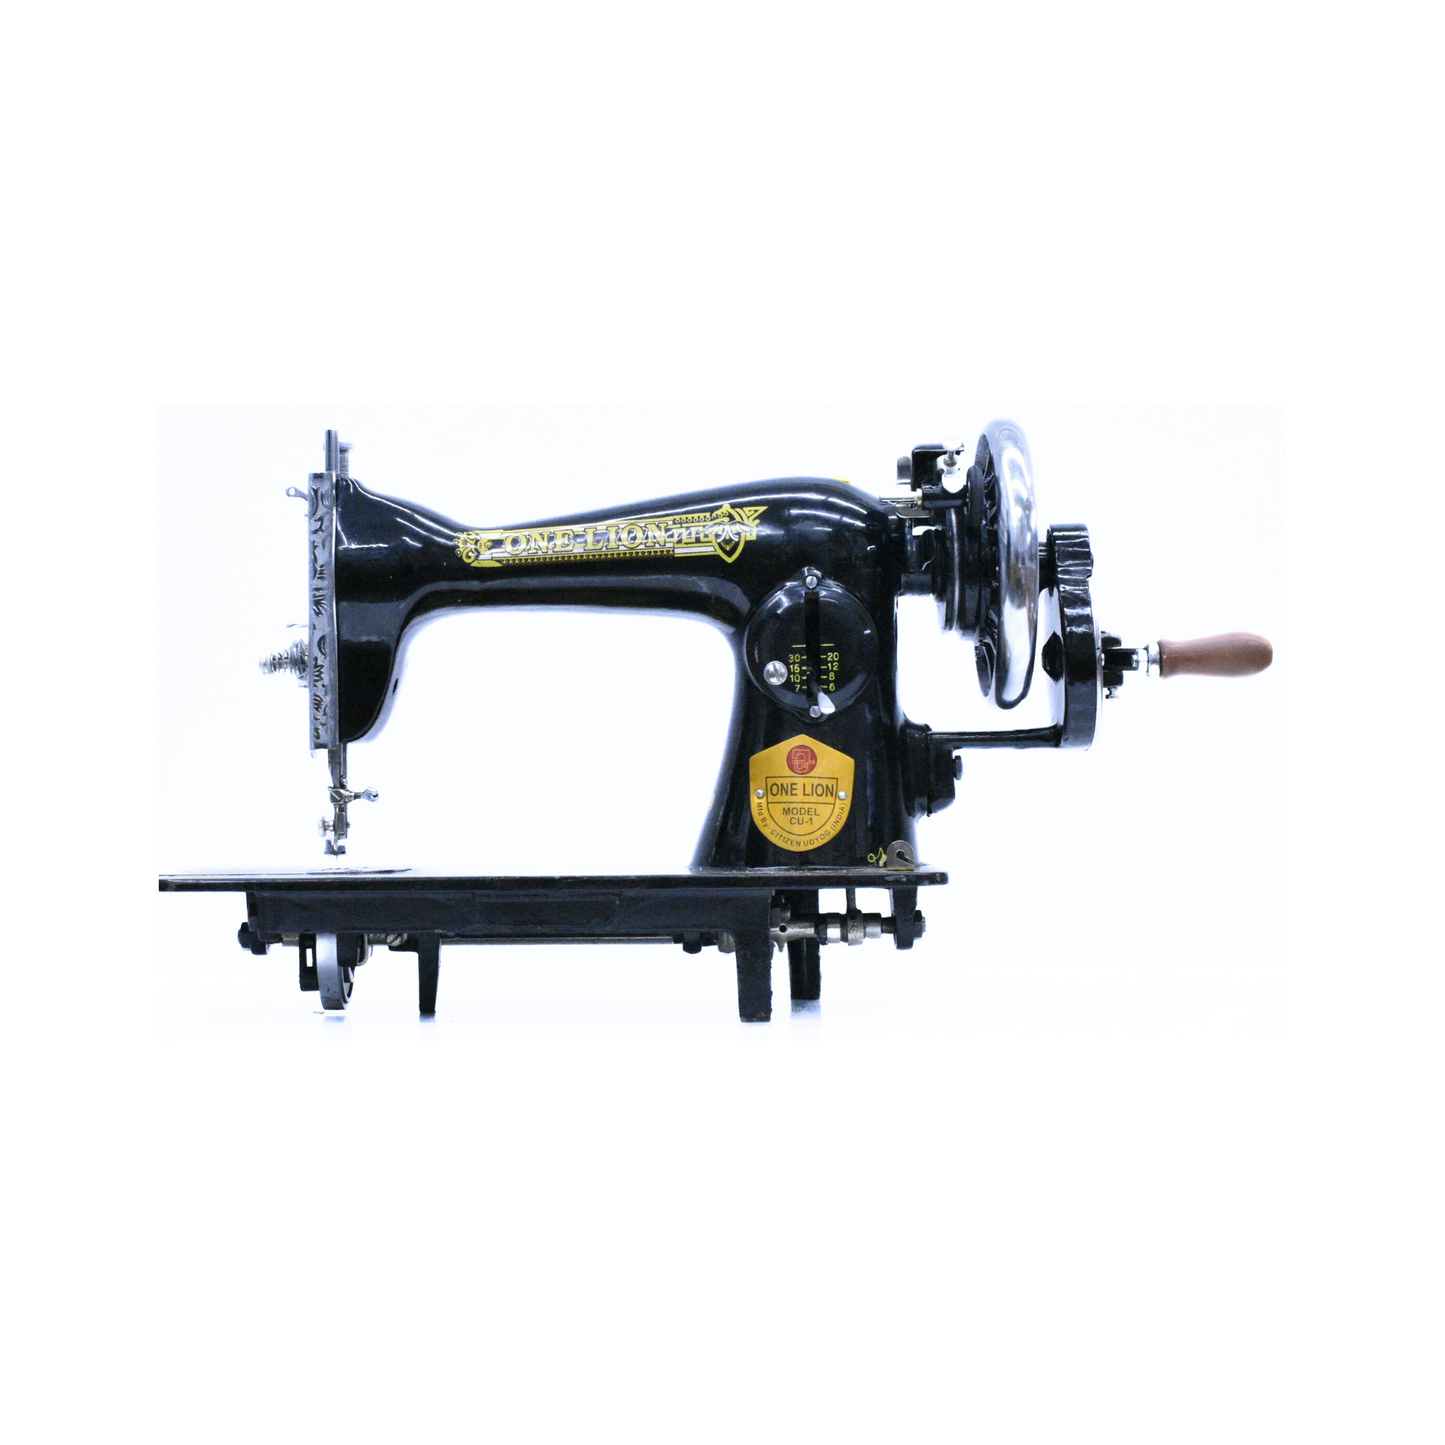 One lion - Vintage sewing machine - Black - Front view